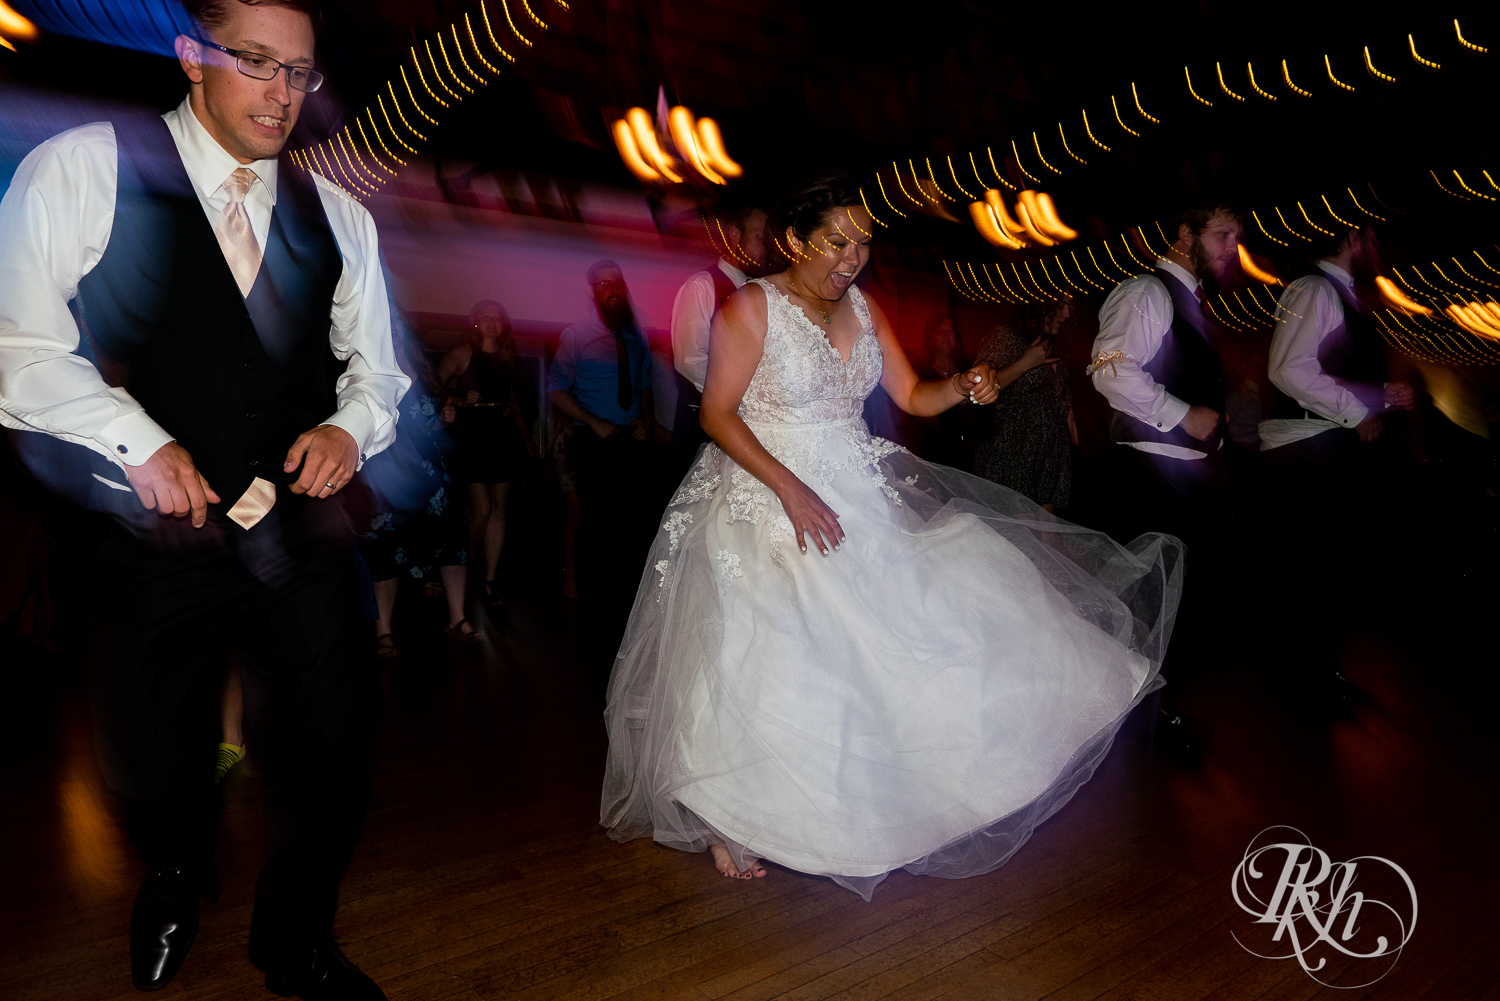 Guests dance with bride and groom at wedding reception at Kellerman's Event Center in White Bear Lake, Minnesota.